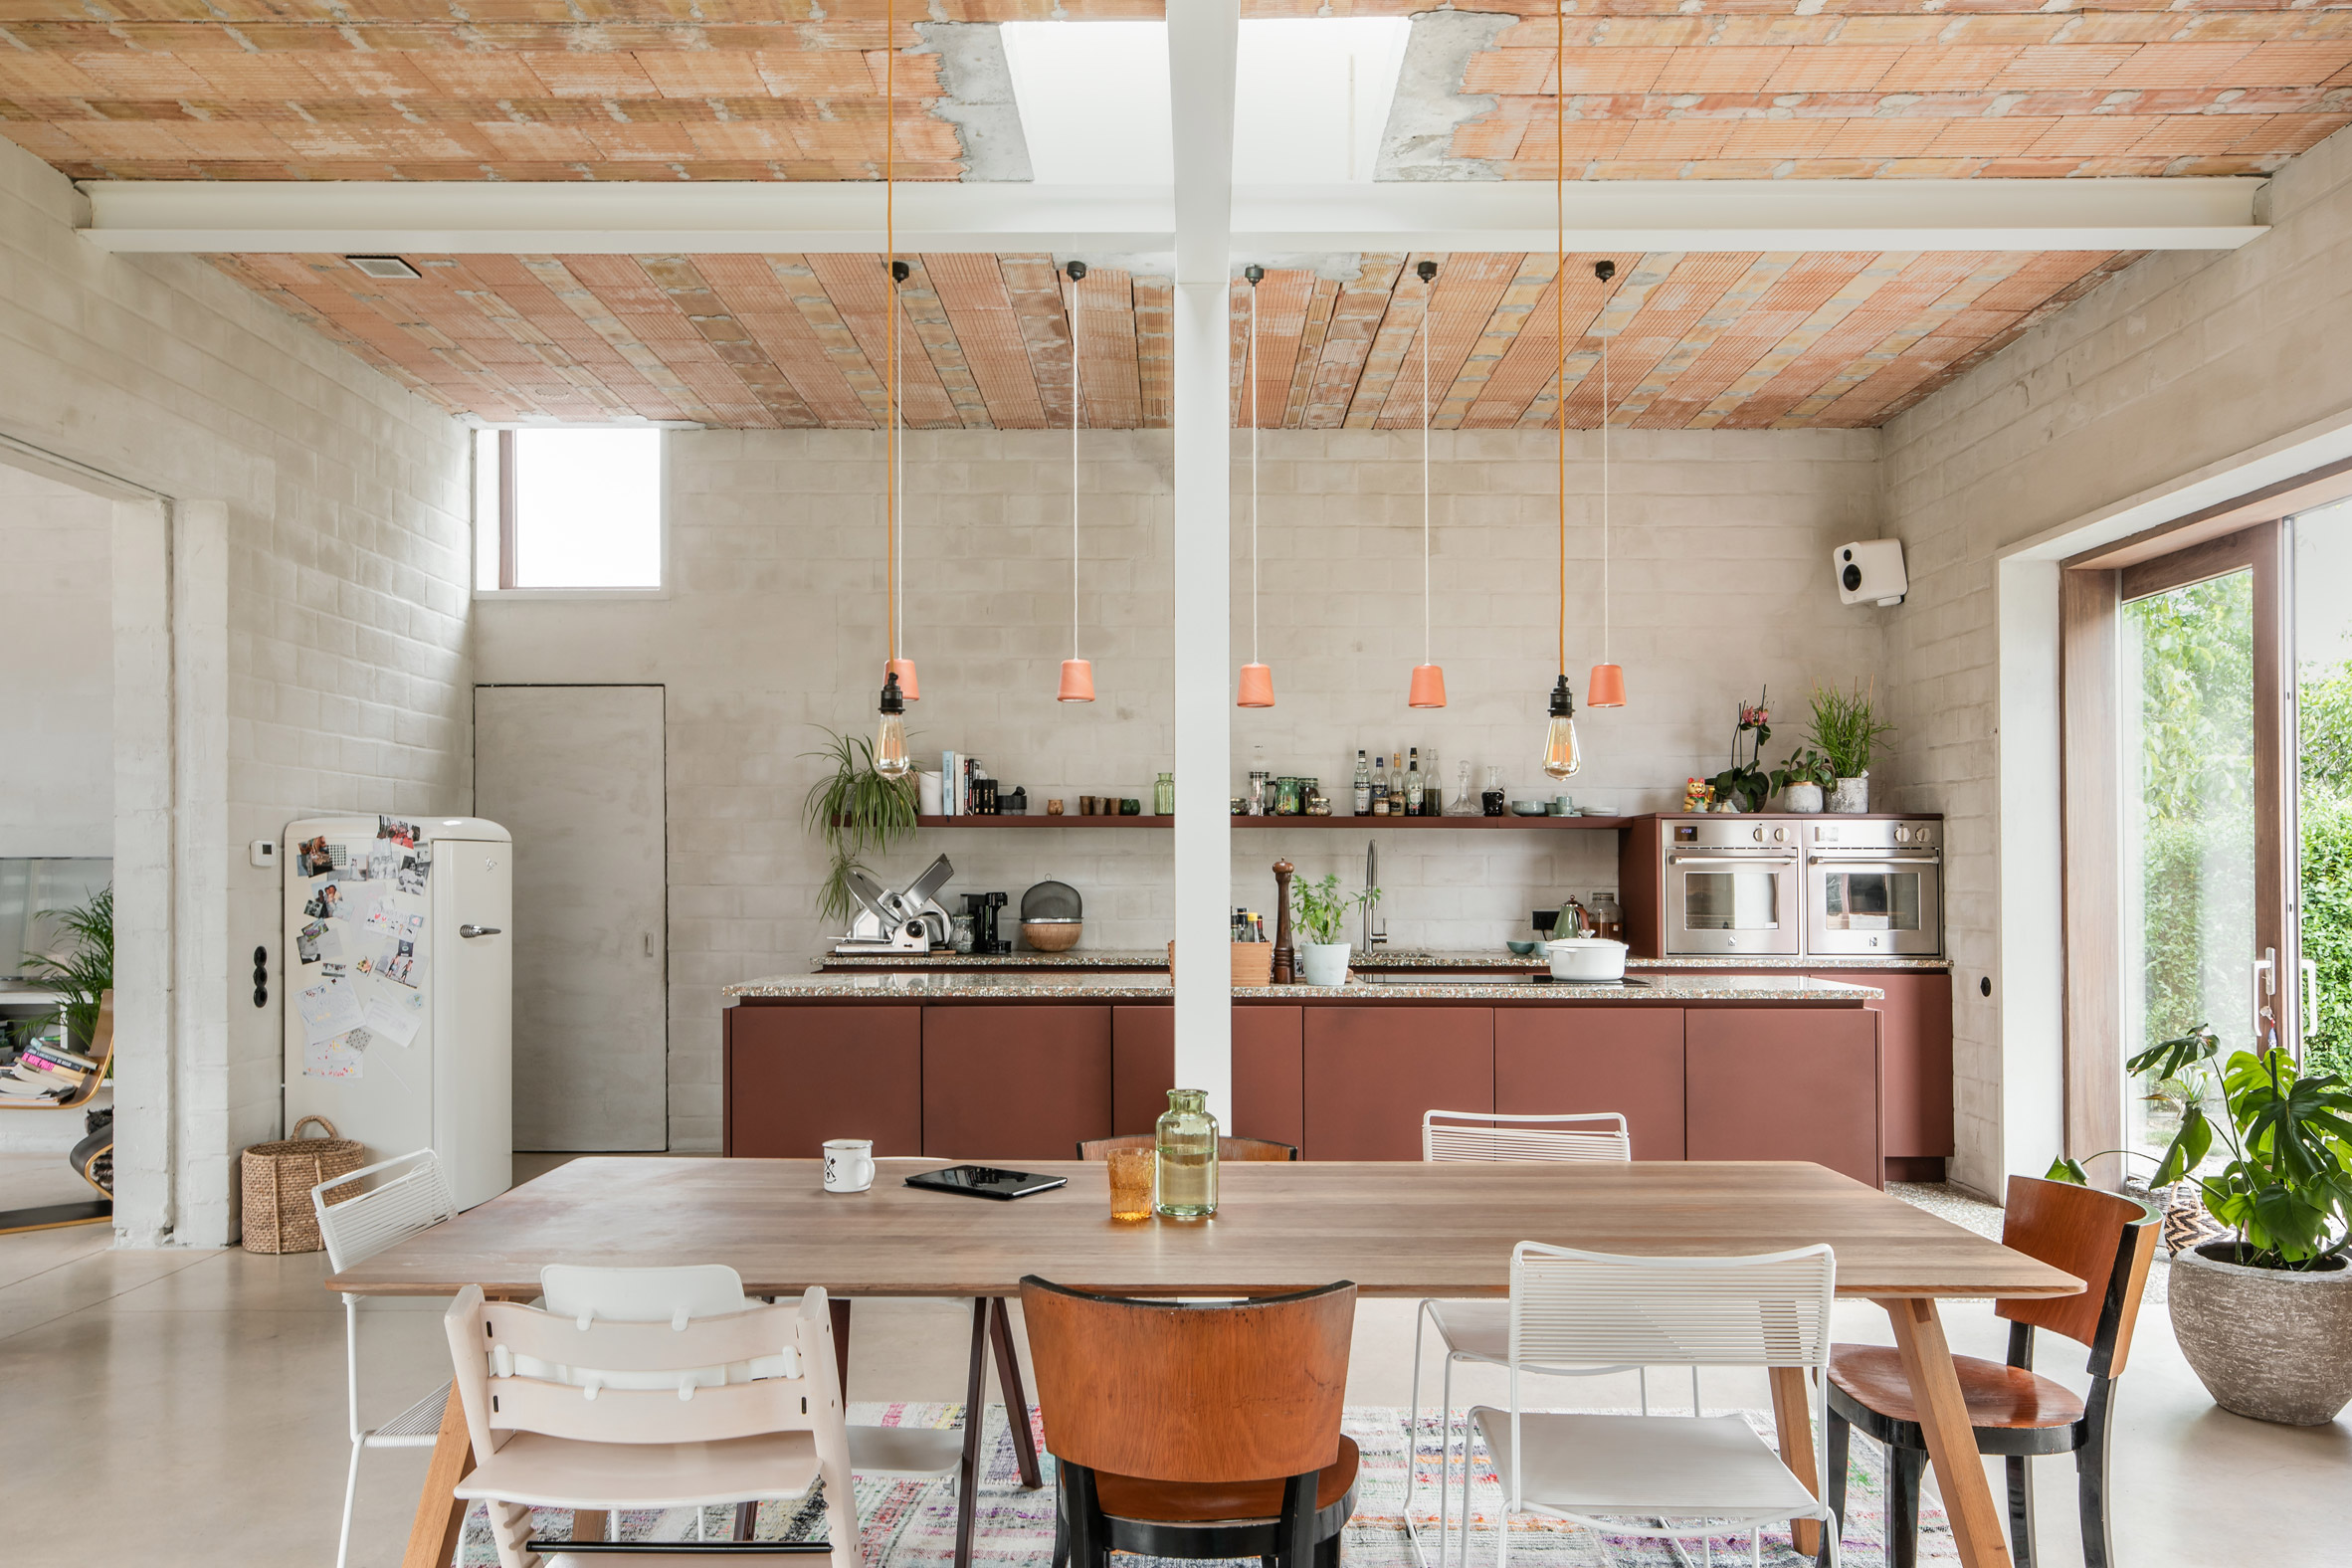 A large kitchen with exposed steel beams